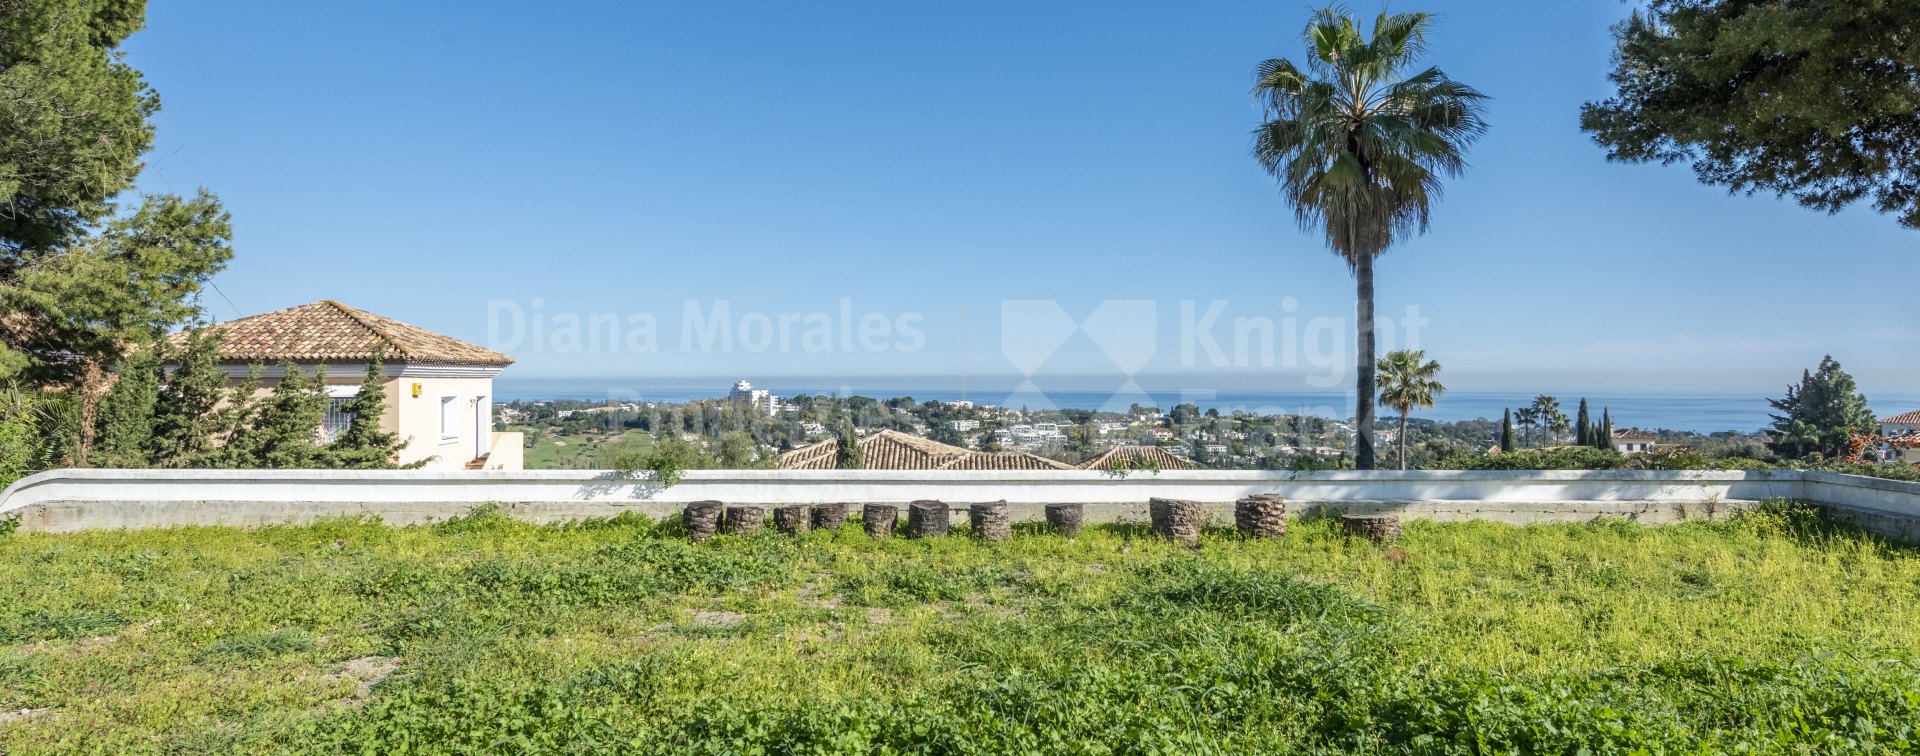 Paraiso Alto, Plot of land with spectacular sea views in a well established community